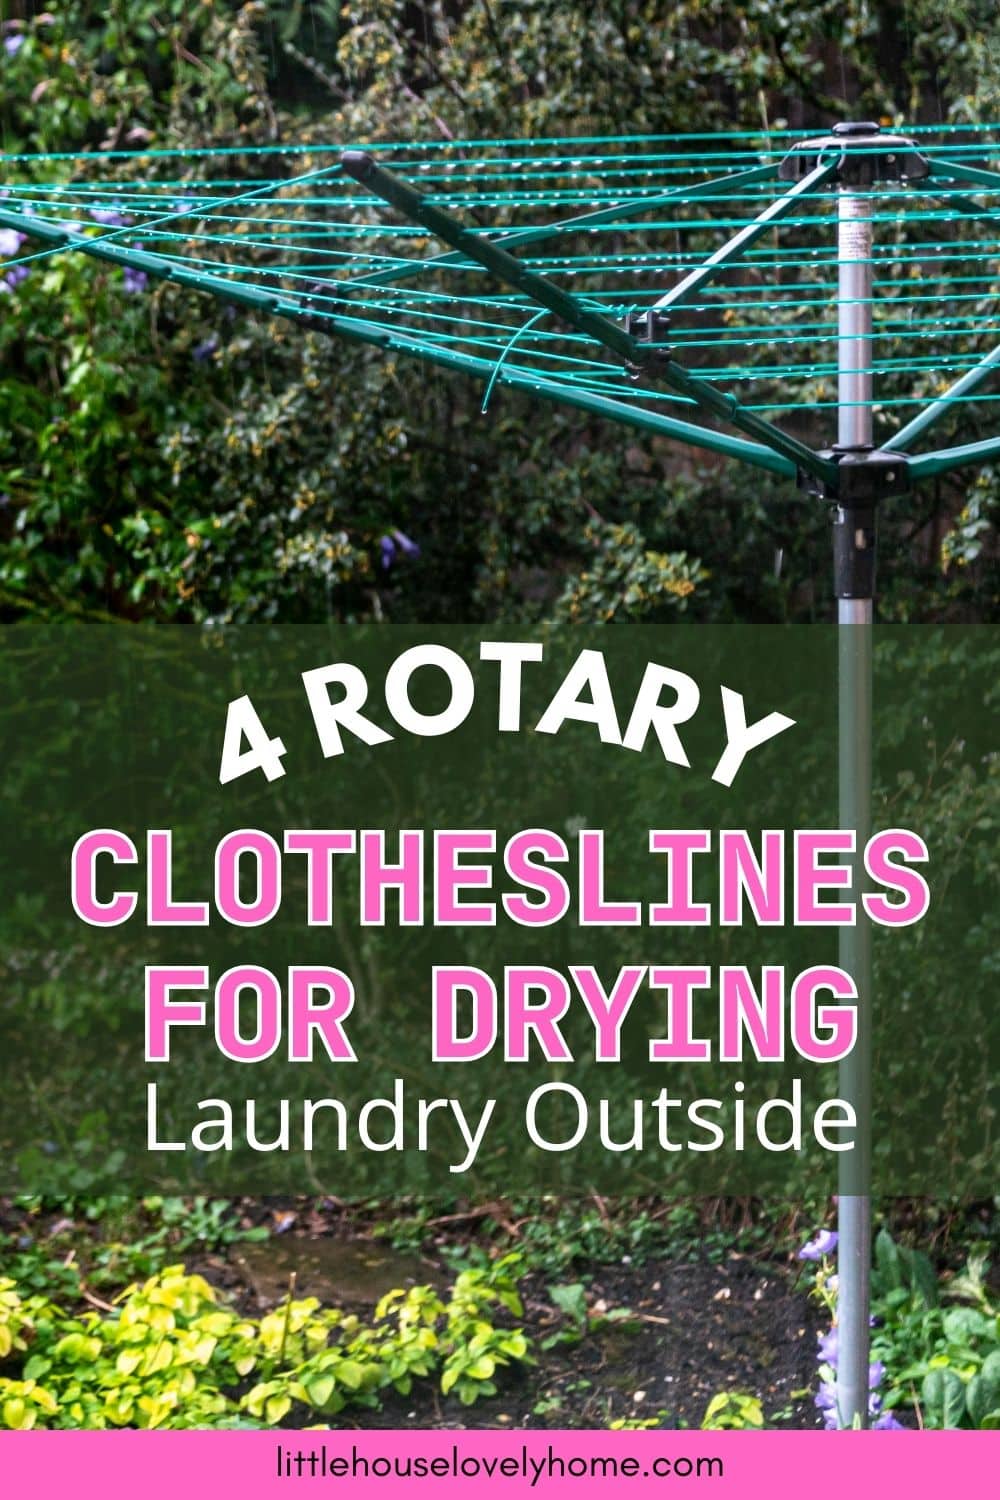 Rotary Clotheslines in backyard